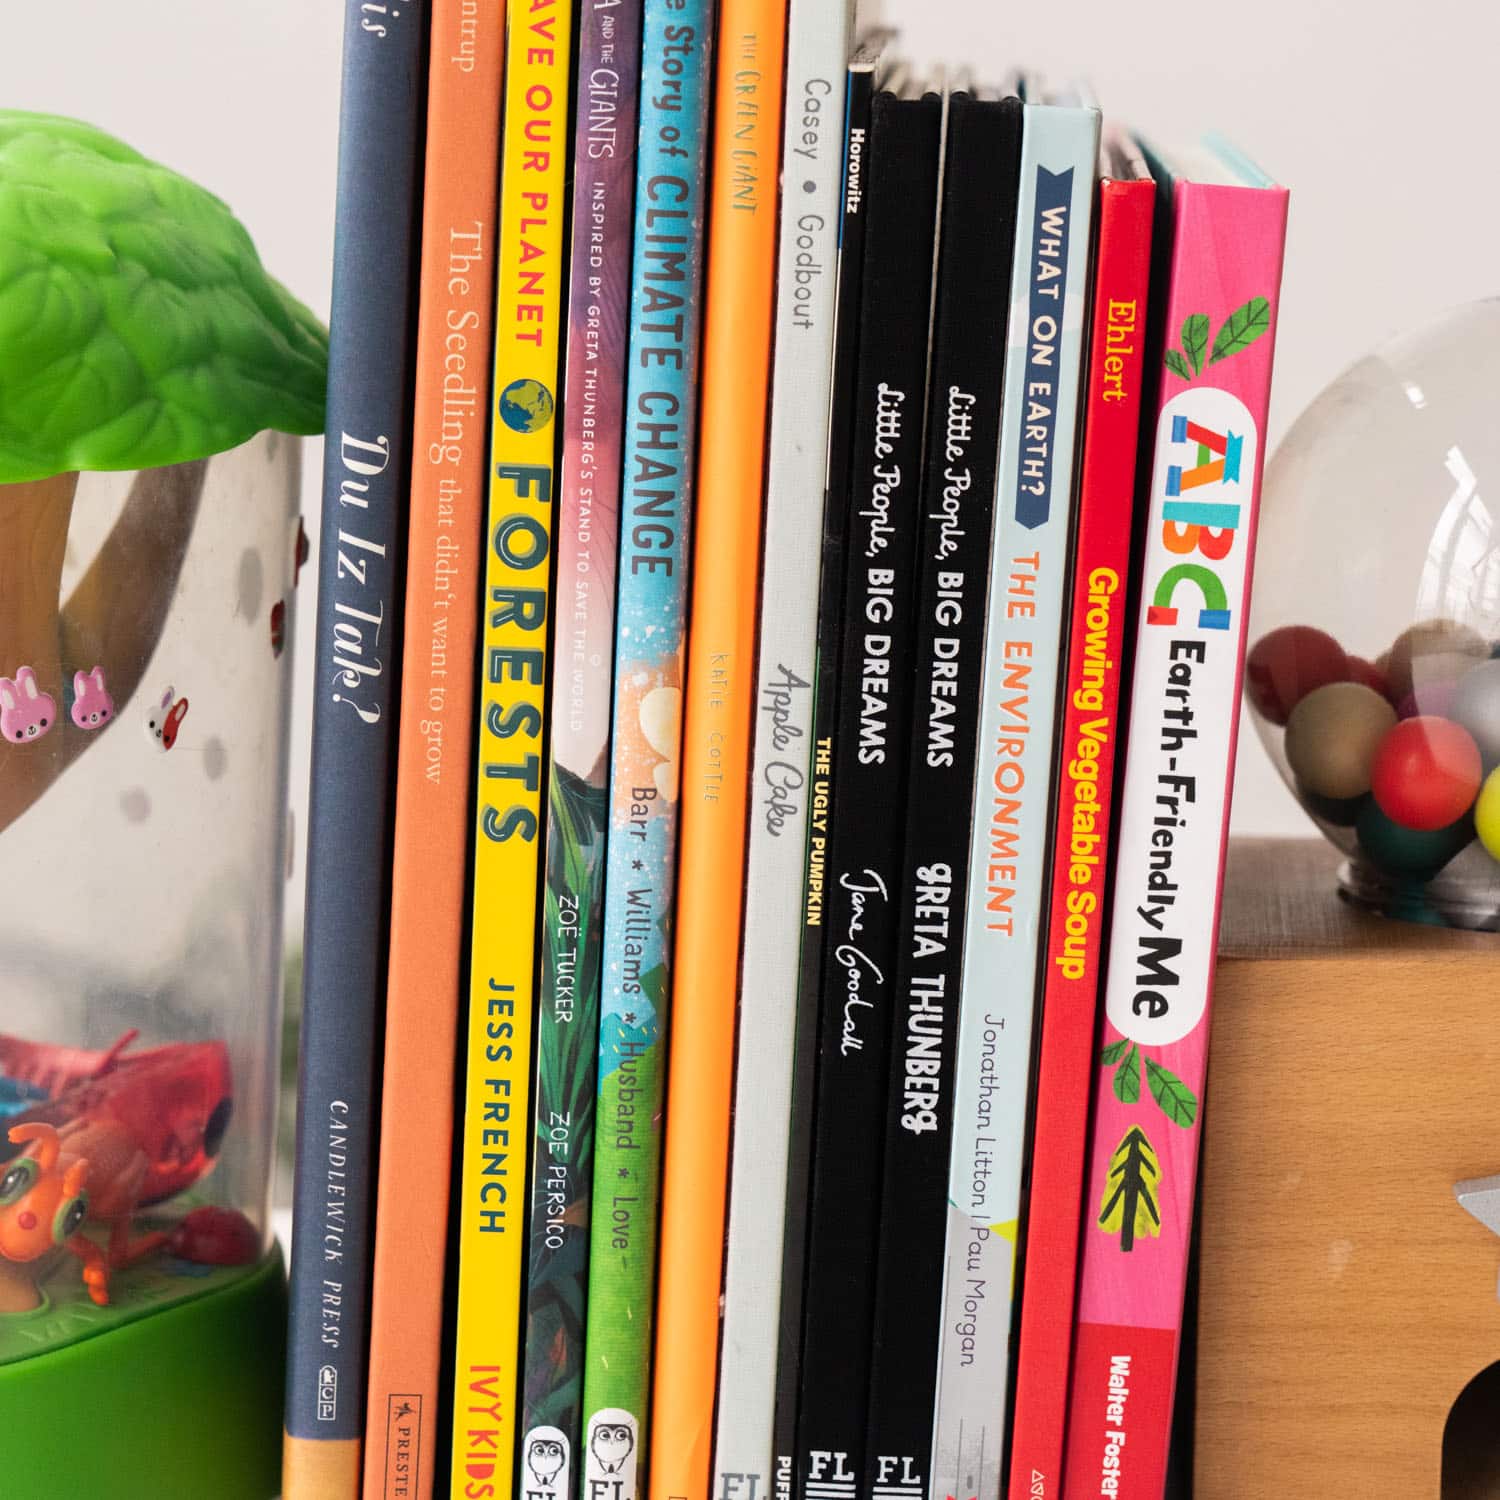 The Best Earth and Garden Books for Kids